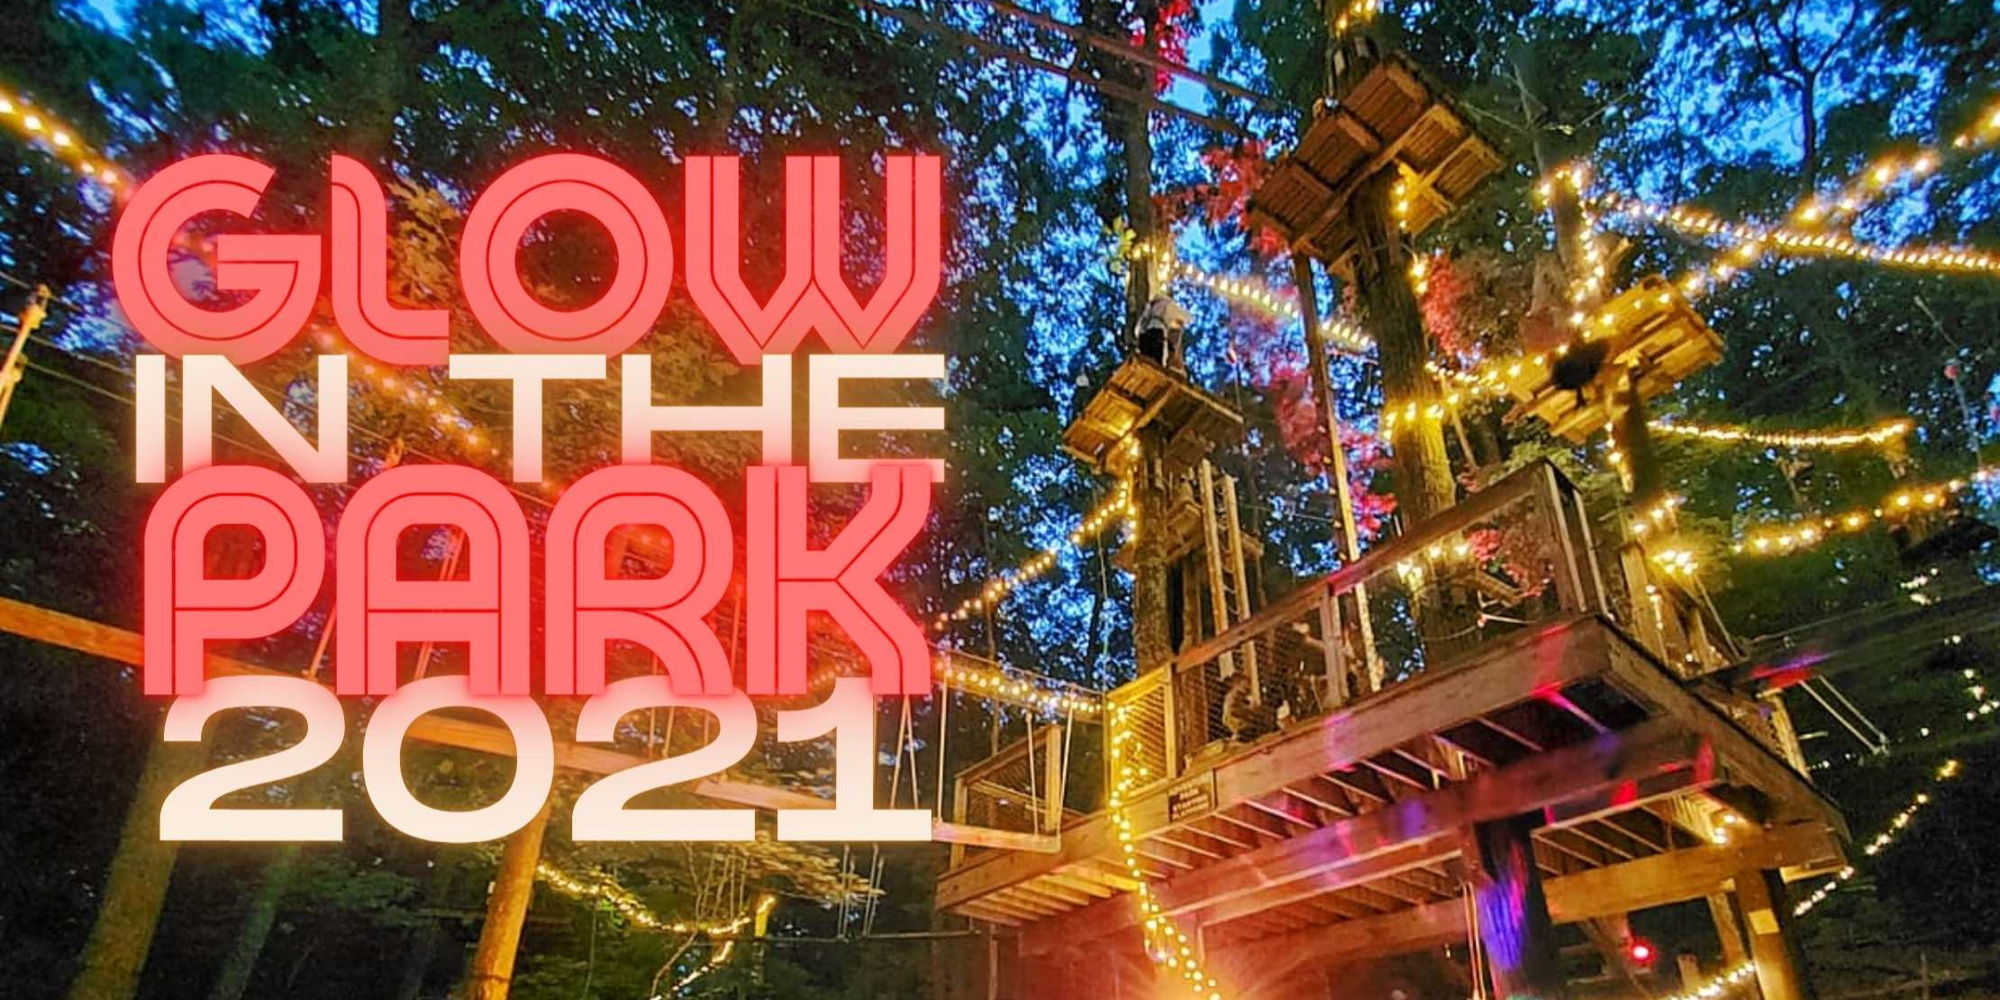 Glow in the Park promotional image